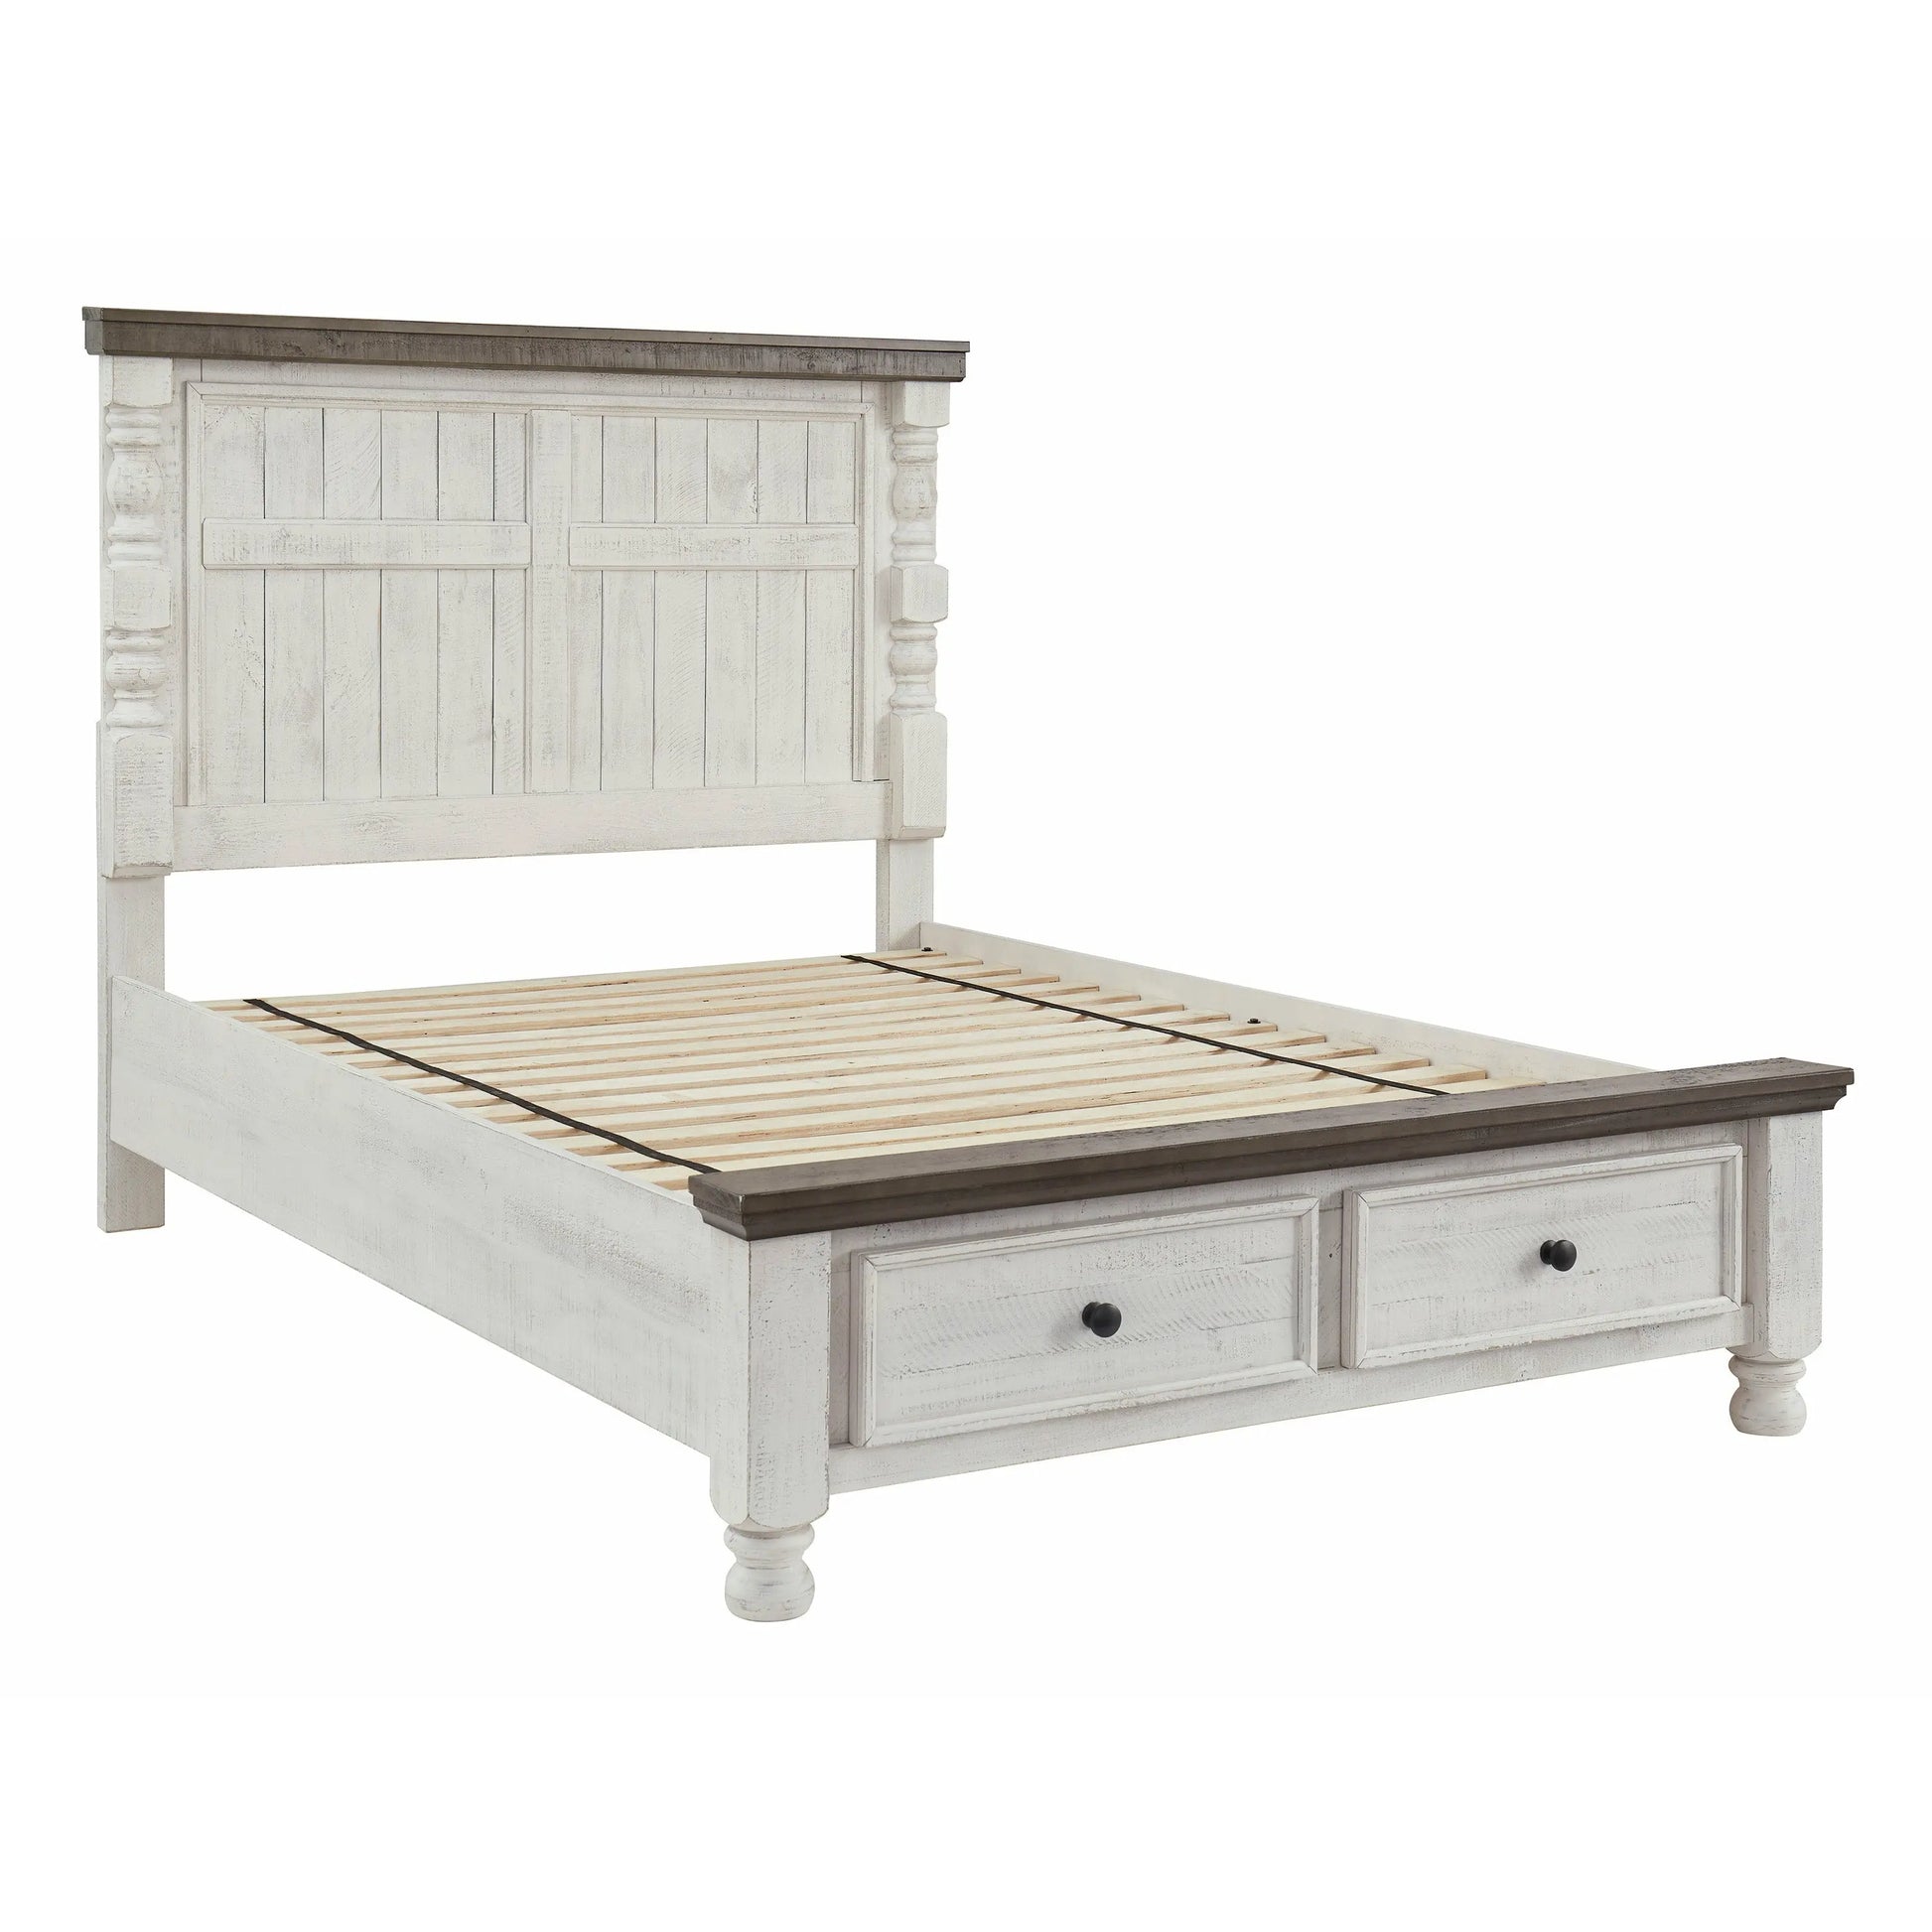 Havalance - Queen Poster Bed with 2 Storage Drawers BED